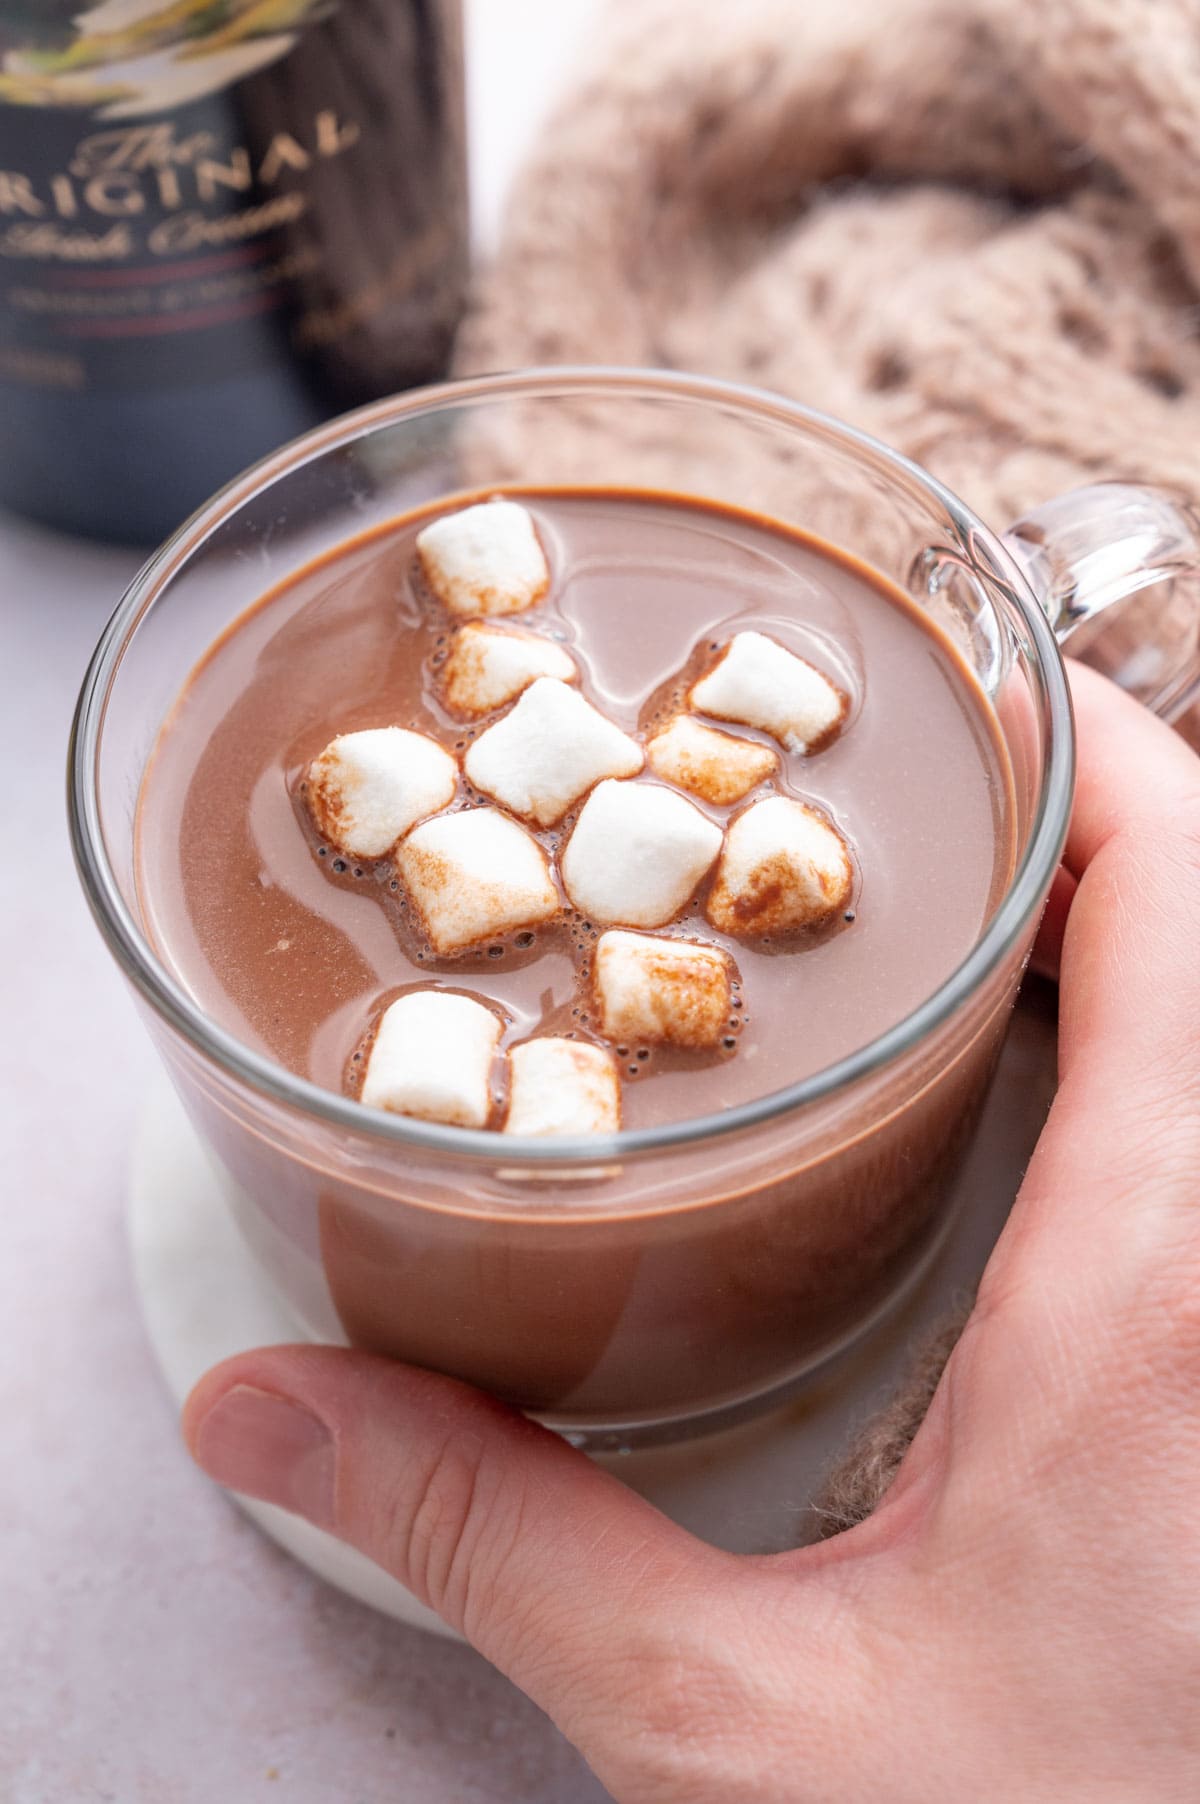 Baileys hot chocolate in a glass topped with marshmallows. A glass is being held in a hand.